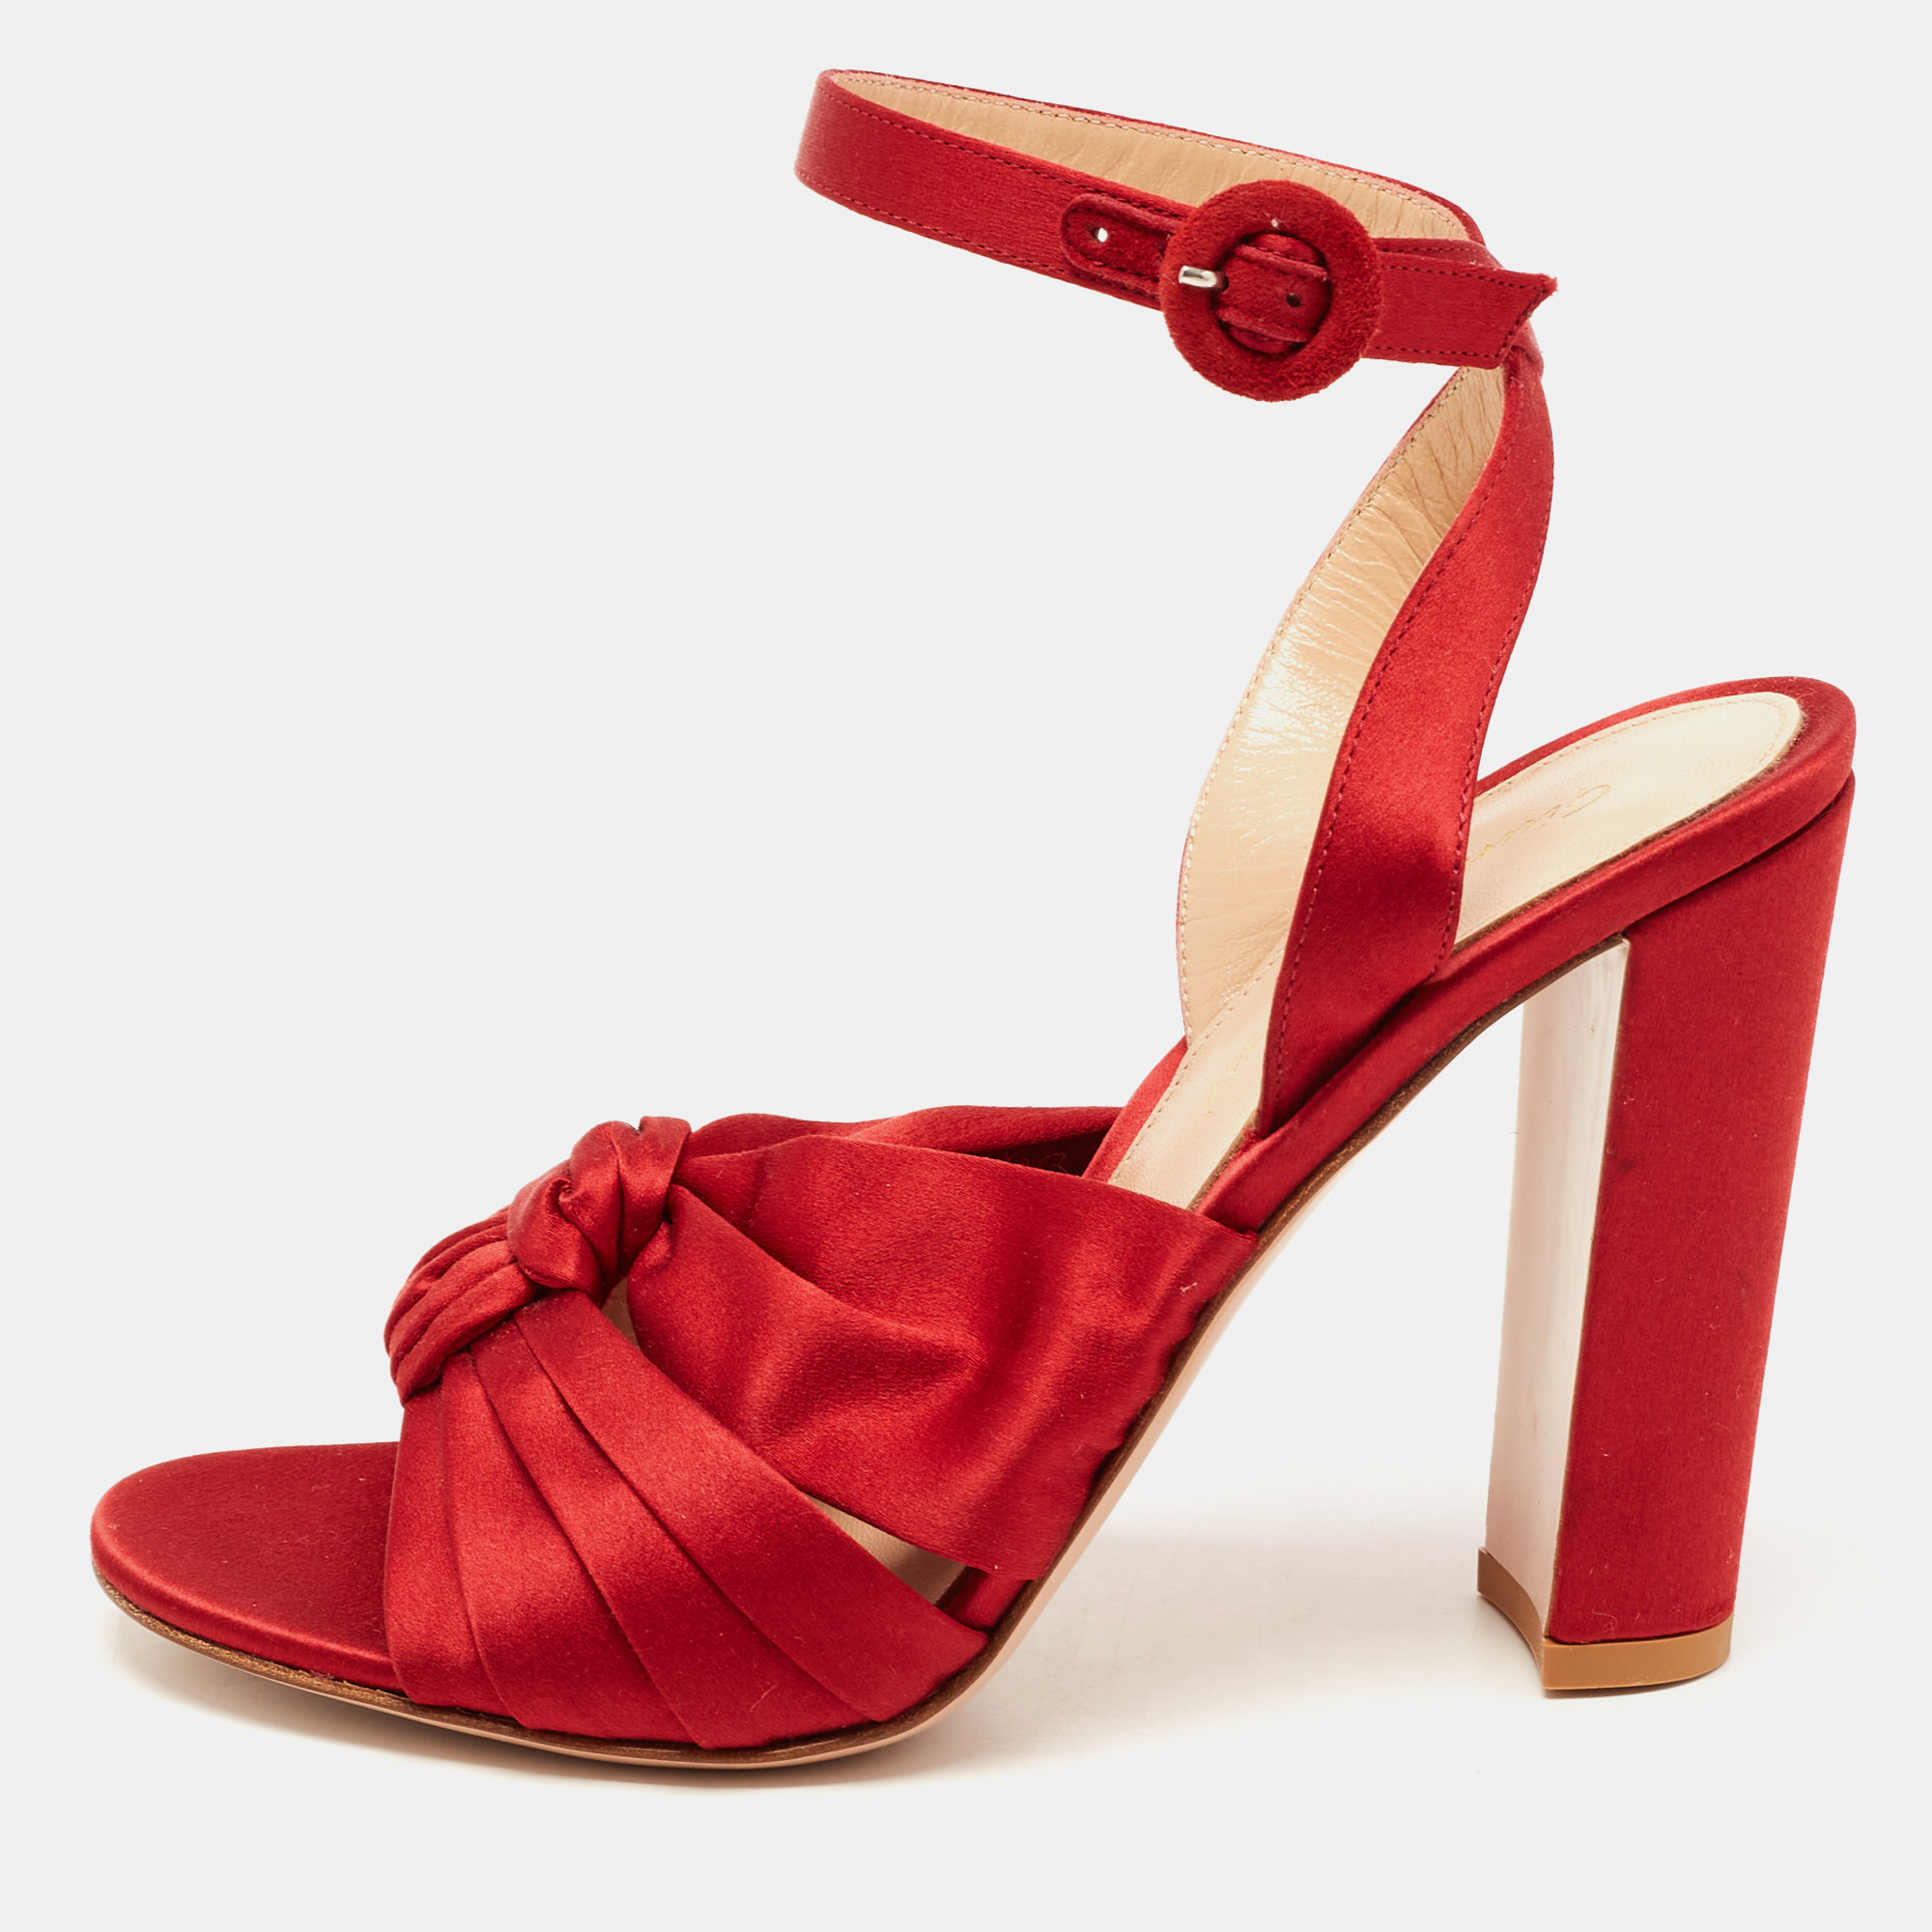 Pre-owned Gianvito Rossi Red Satin Knot Ankle Strap Sandals Size 37.5